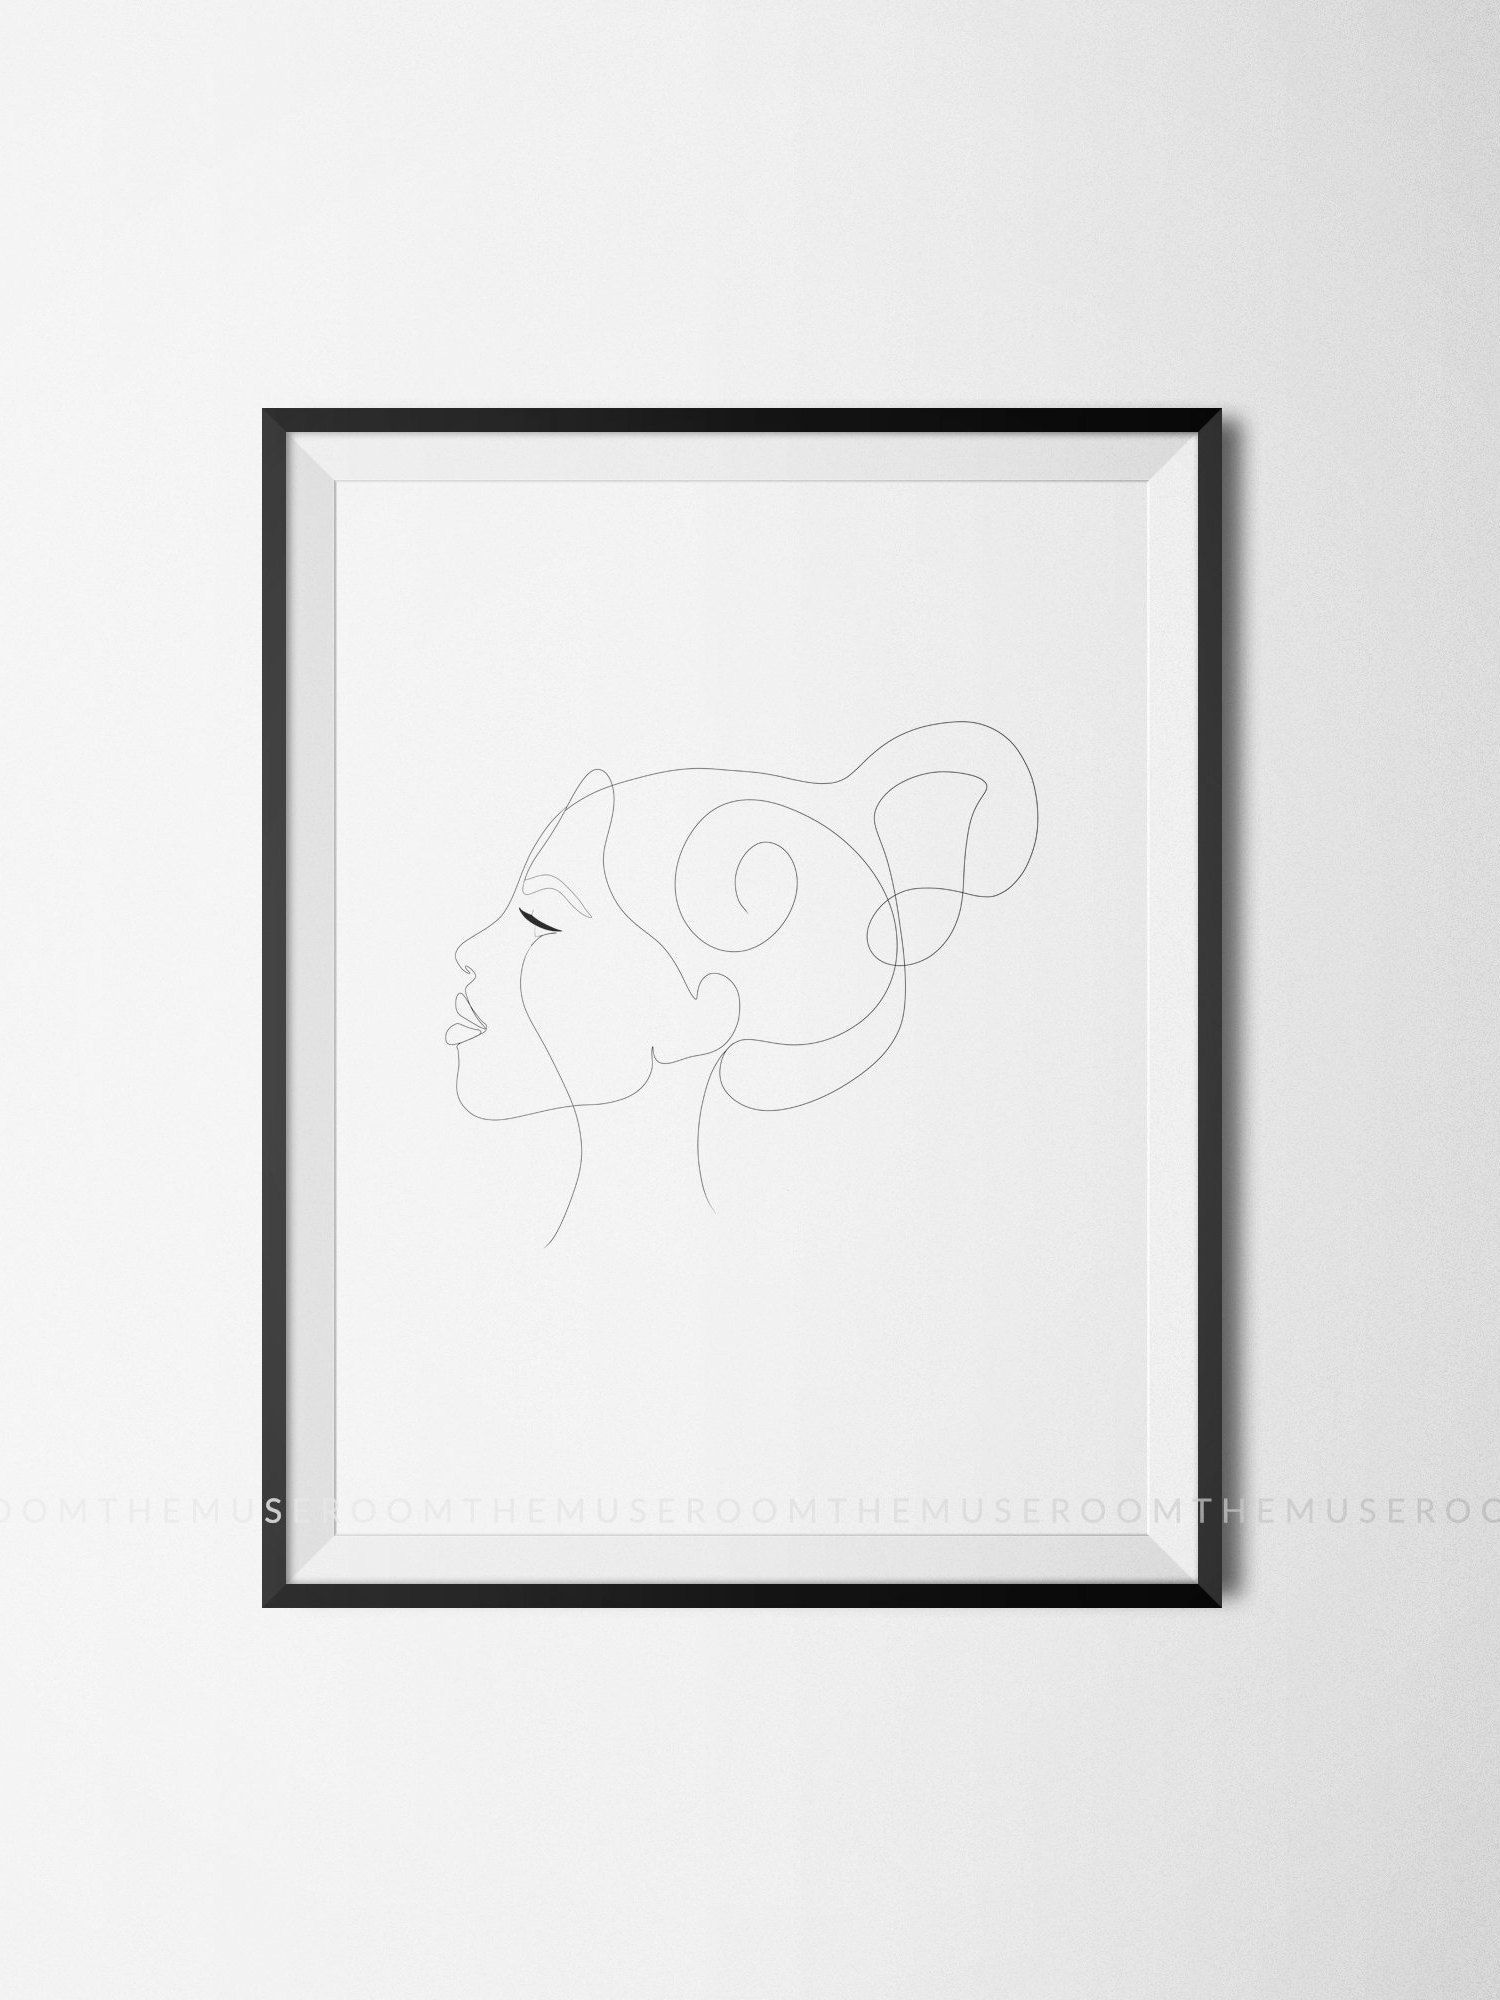 Line Drawing Poster, Single Line Drawing, Single Line Print, Abstract Line Art, Minimal Face Print, Side Profile Print, Hairstyle Print -   8 hairstyles Drawing profile ideas